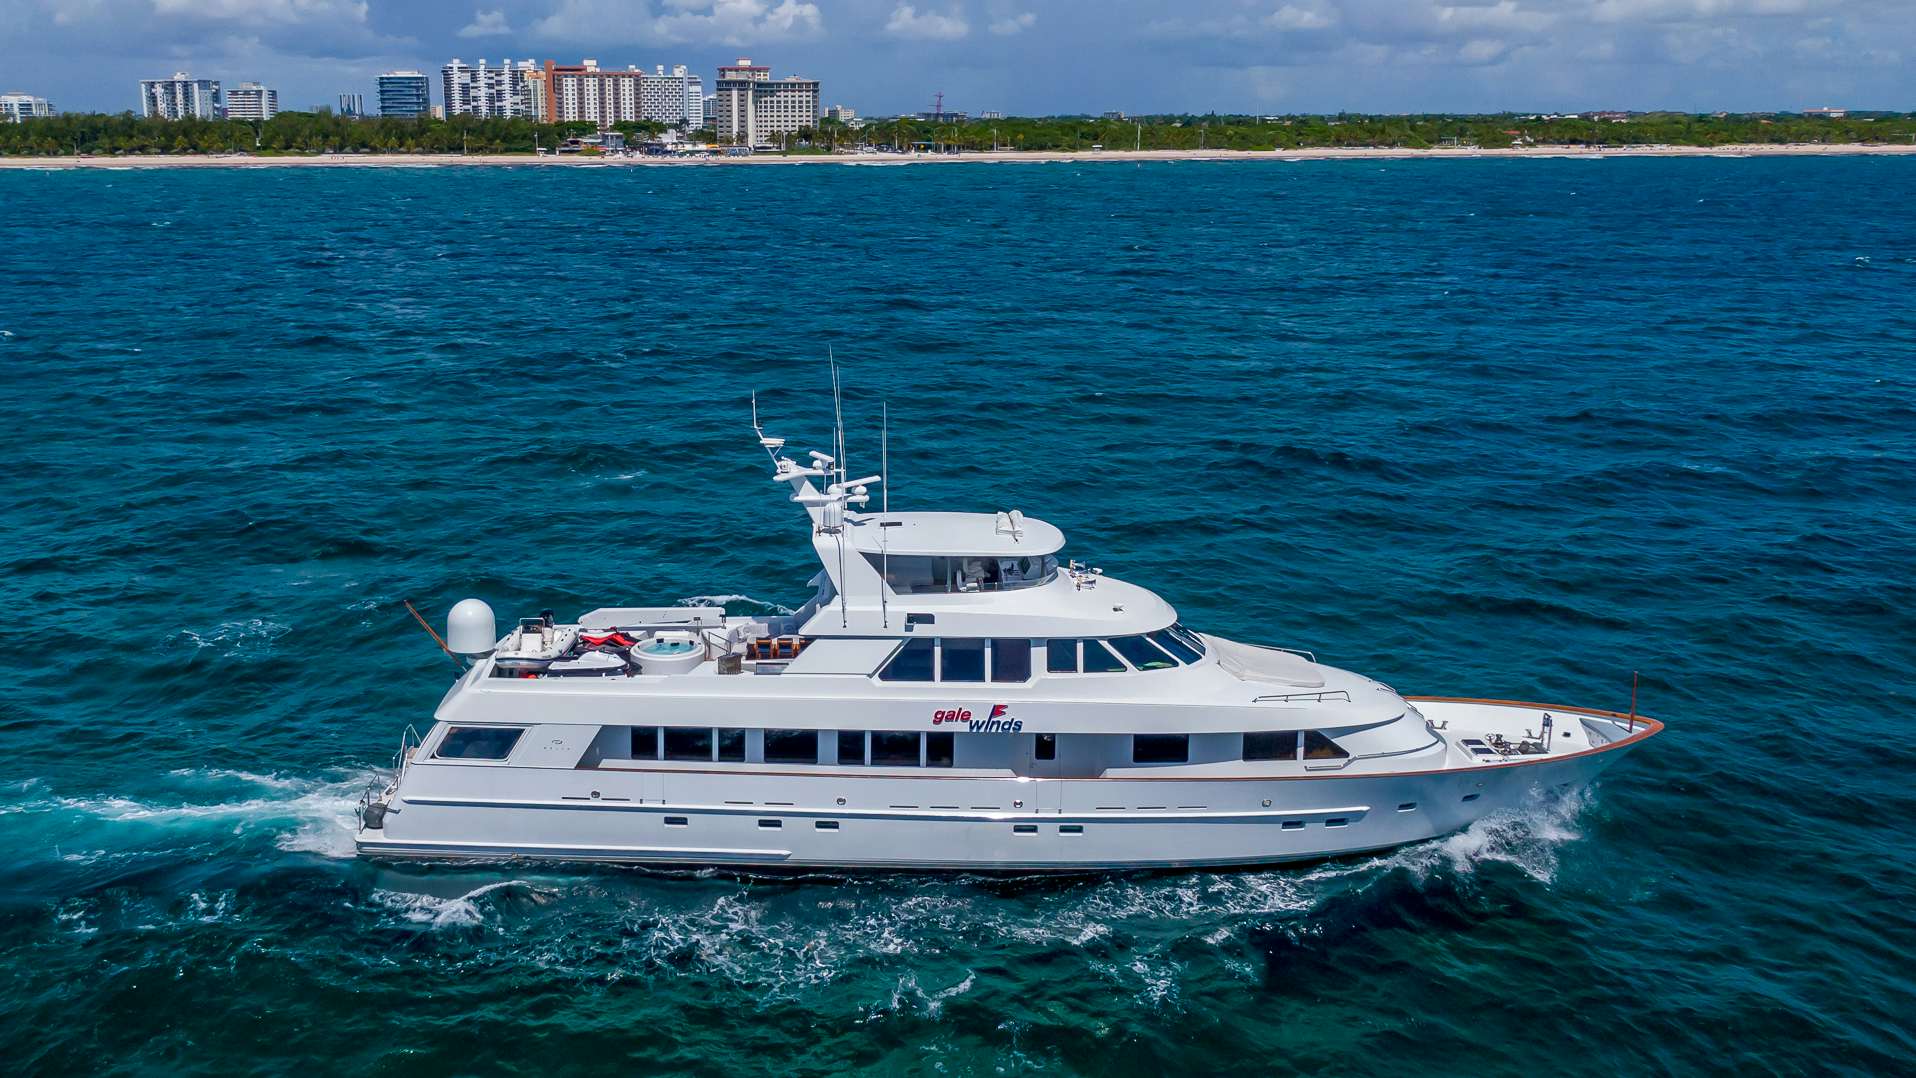 Watch Video for GALE WINDS Yacht for Charter